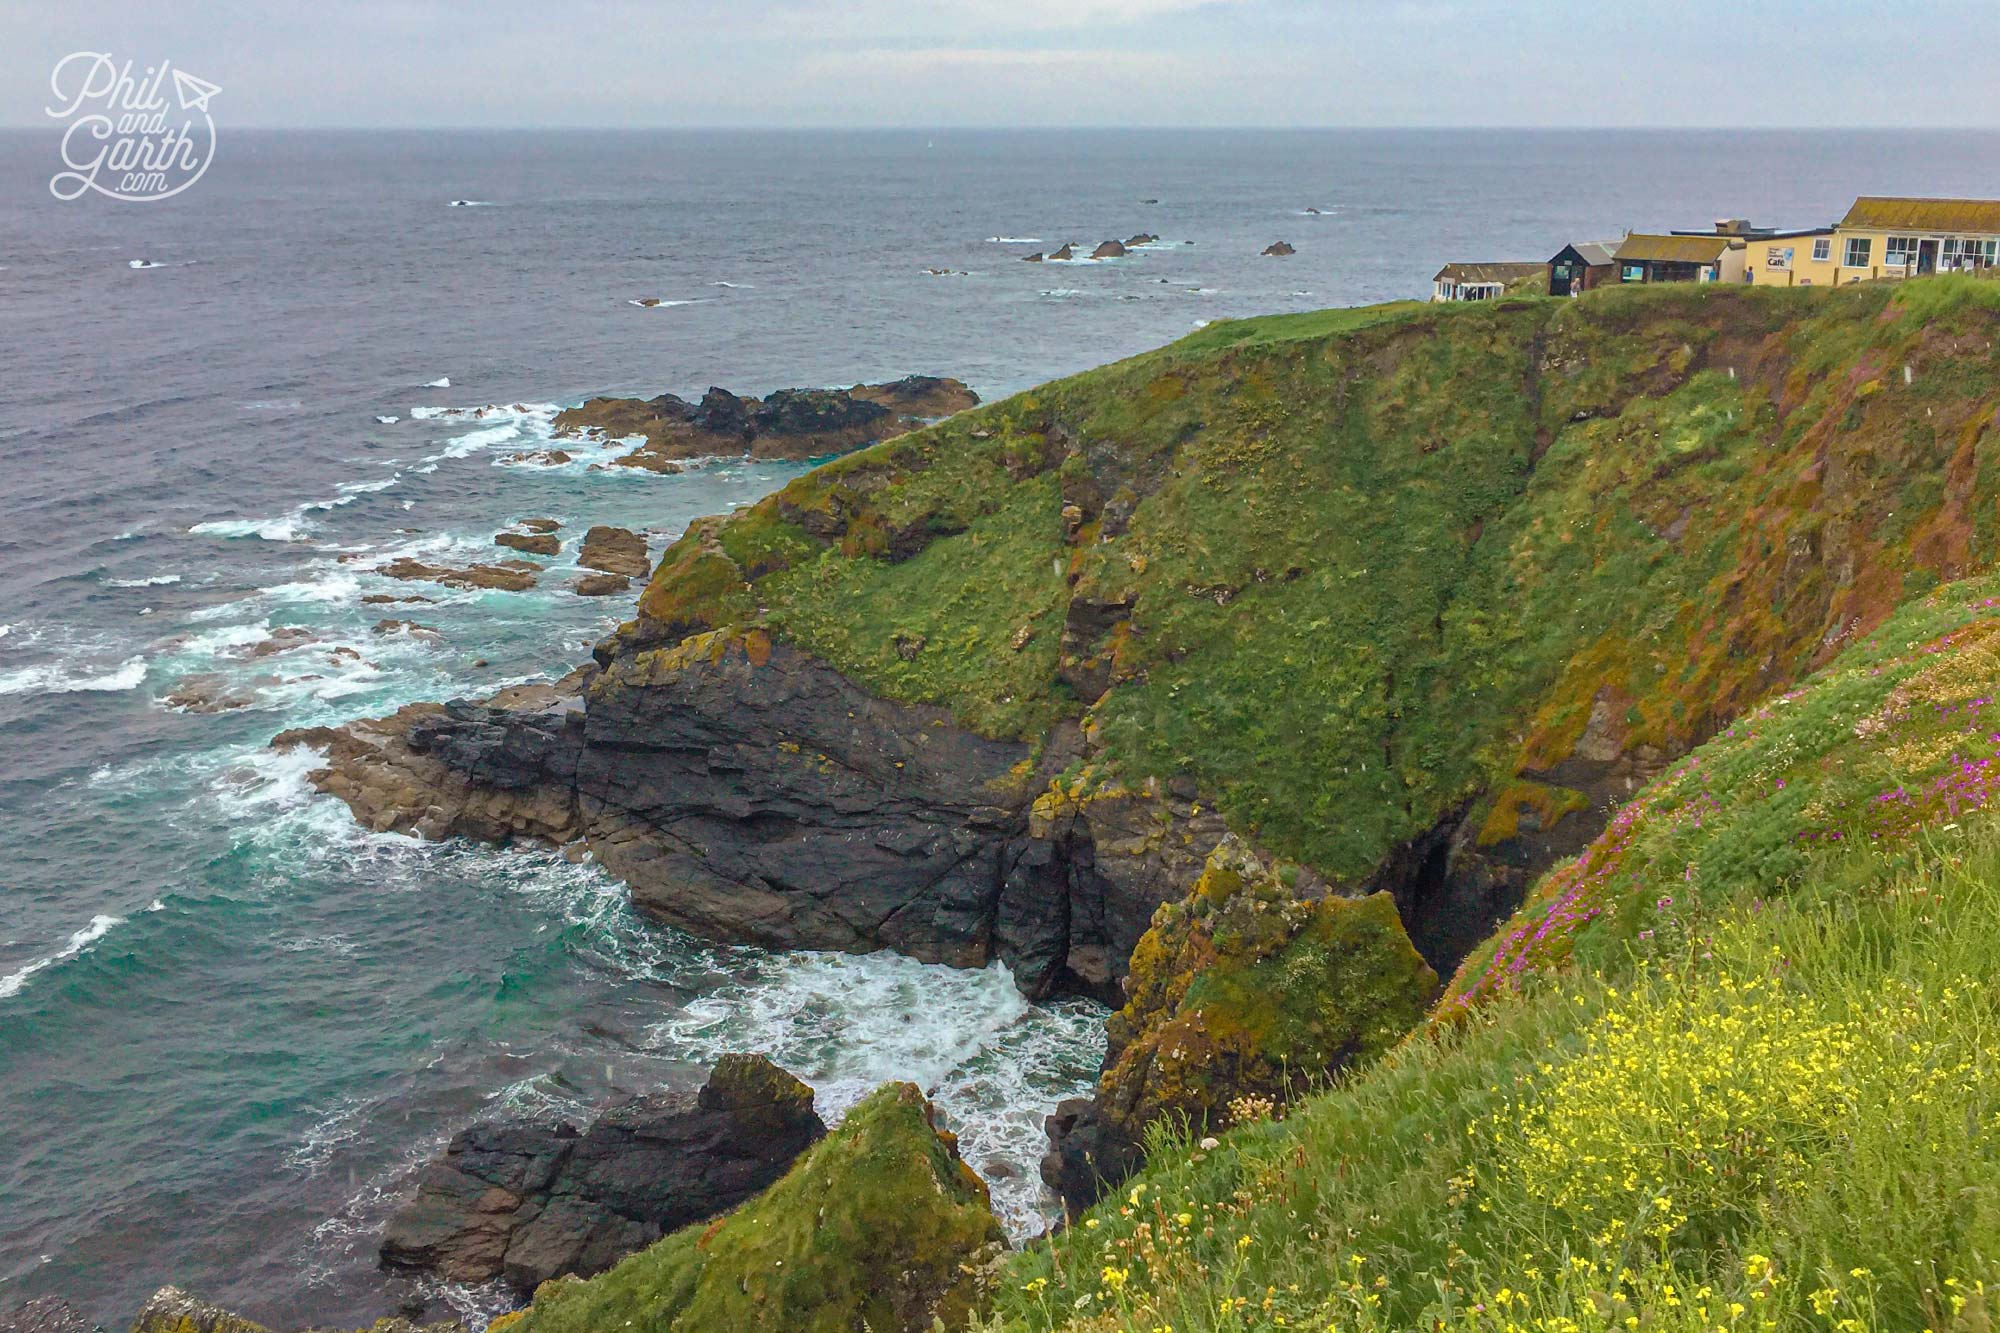 The only buildings at Lizard Point are a cafe and a souvenir shop